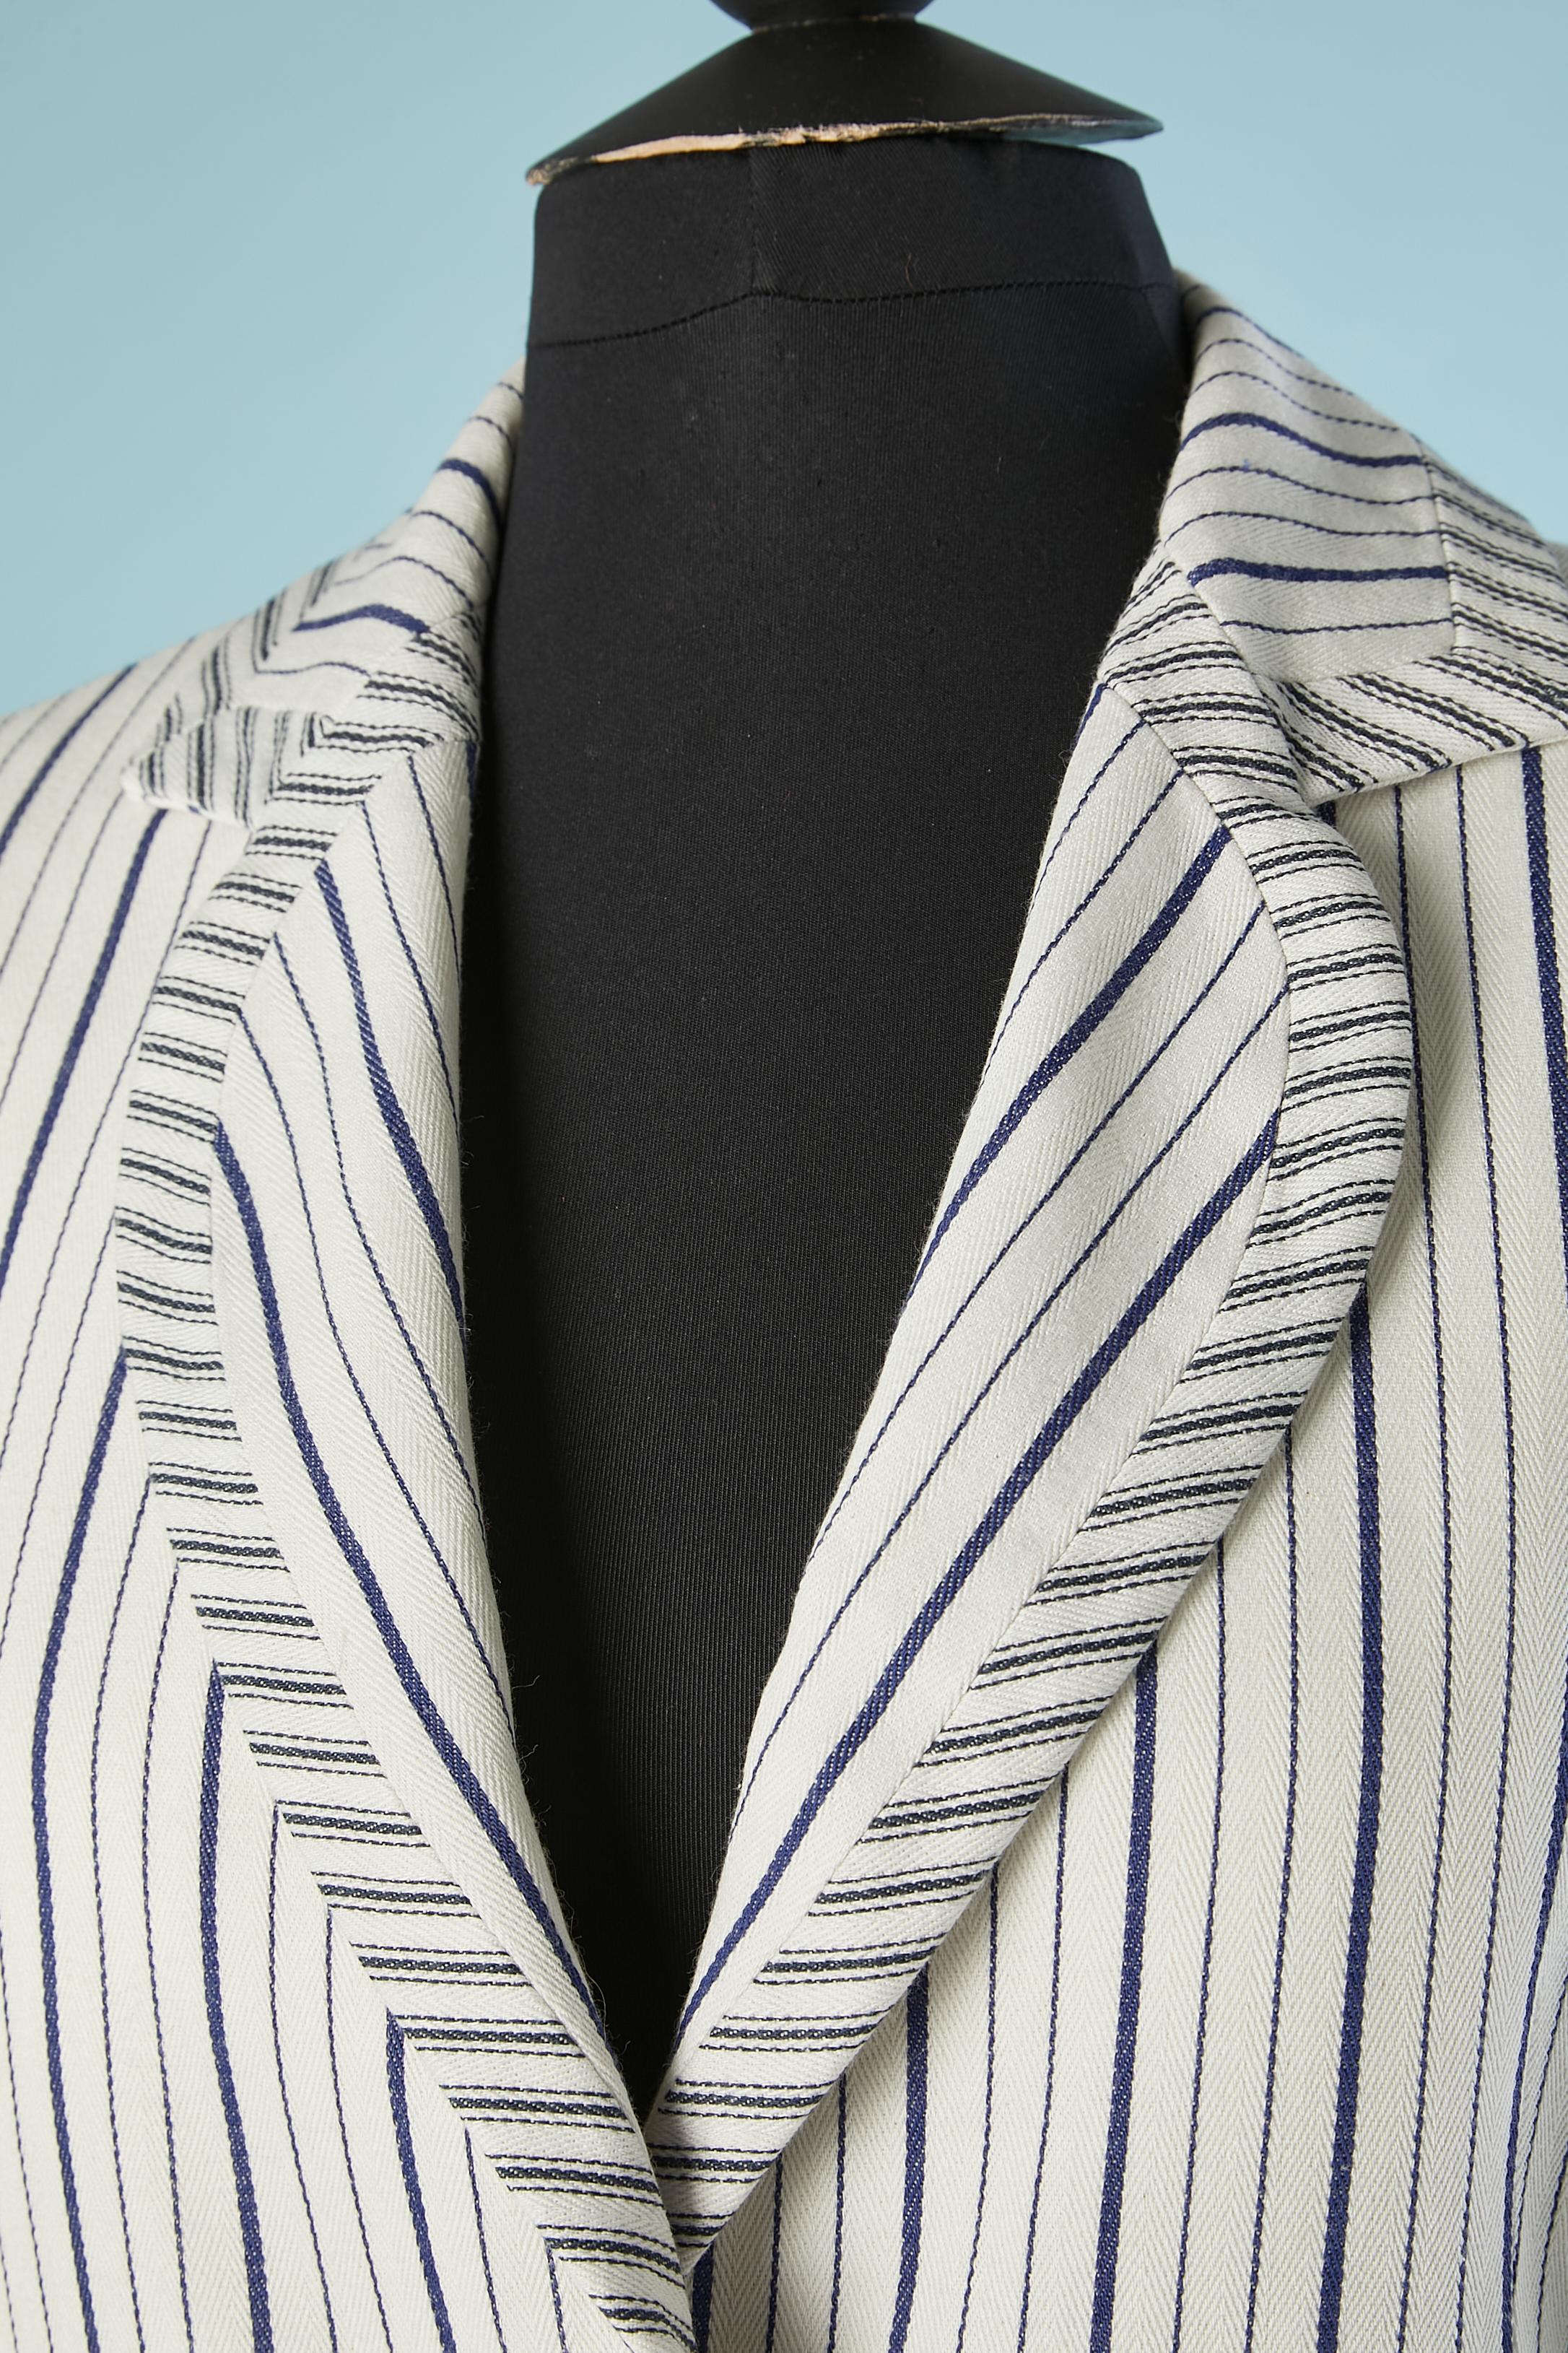 Mix stripes cotton single breasted blazer. Main fabric composition: 43% cotton, 57% rayon. 100% Silk lining. Mother-of-shell branded button.  Shoulder-pad.
SIZE 42 (FR) 10 (US)